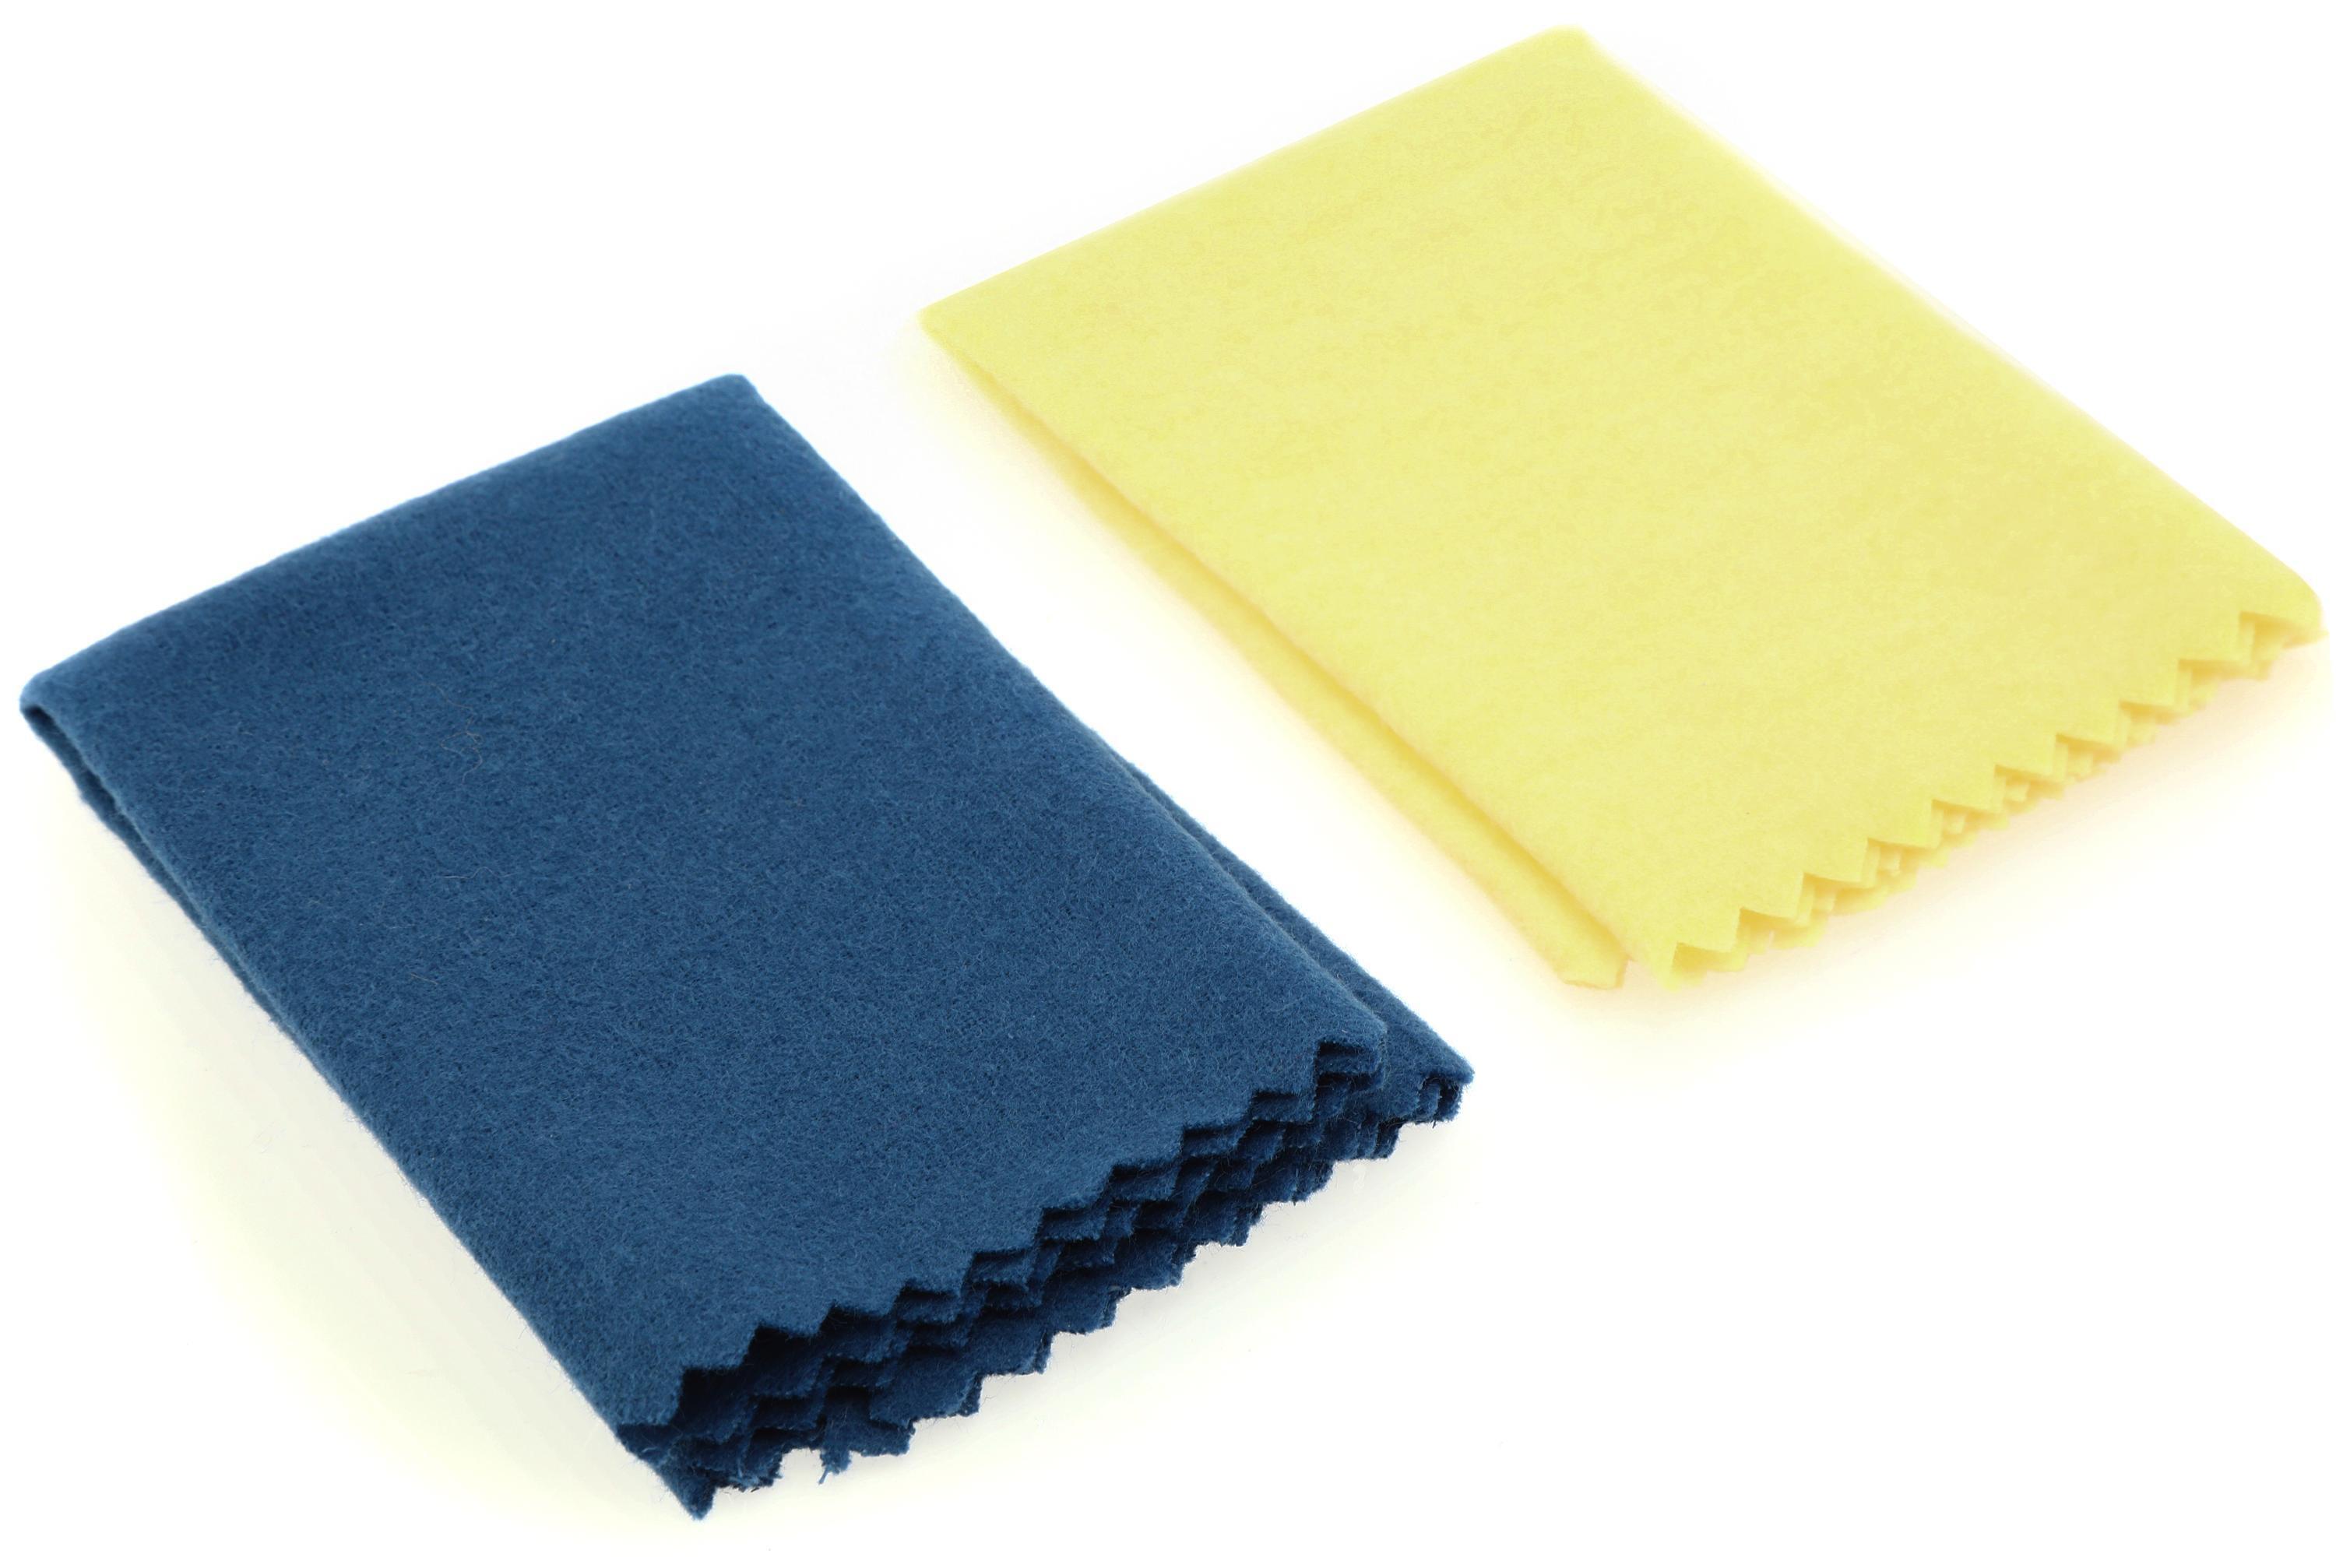 Blitz Metal Guitar String Care Cloth - 2 Cloths | Sweetwater